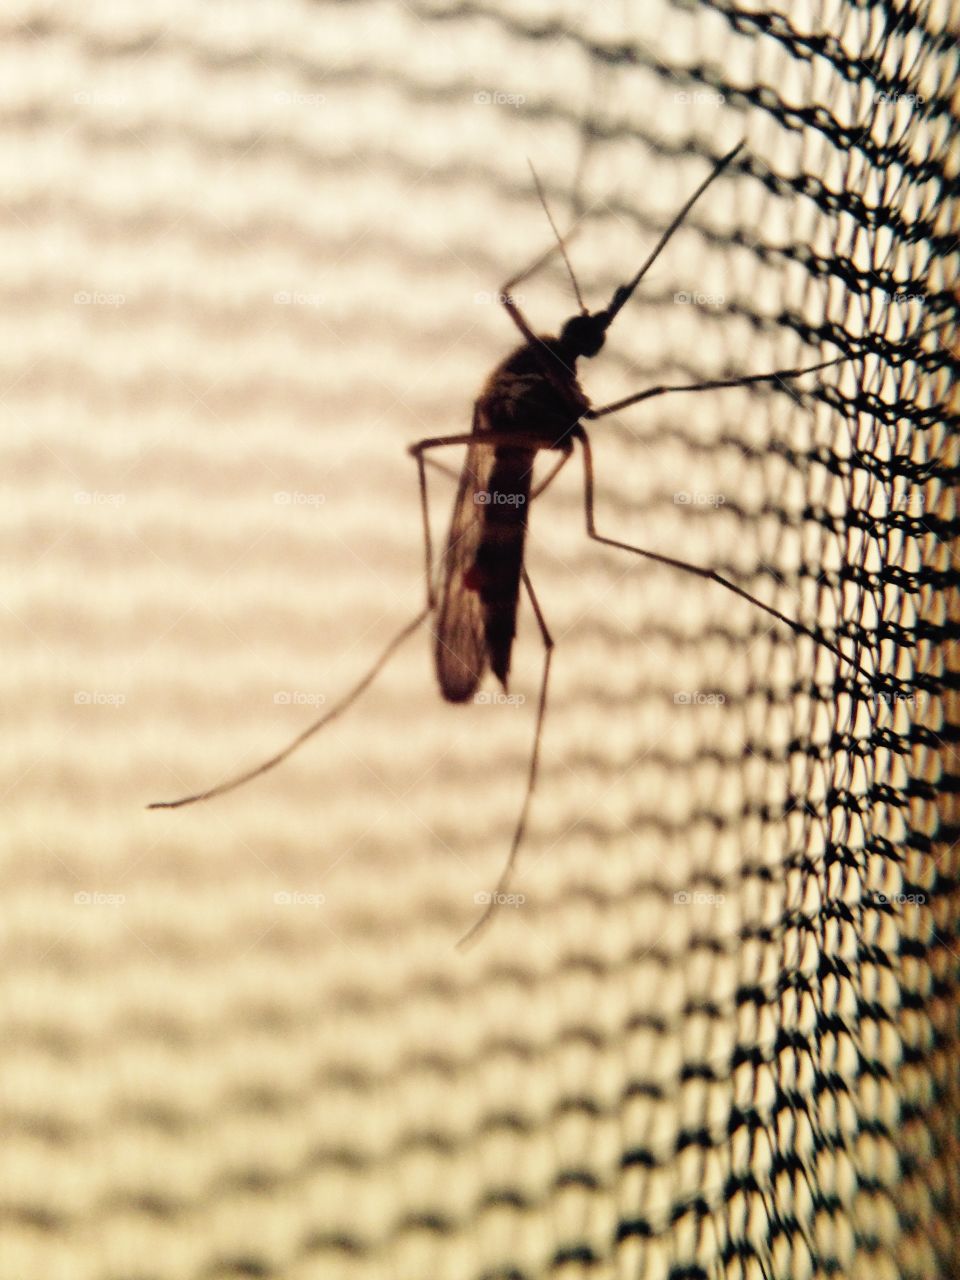 Mosquito. Mosquito outside the tent’s net